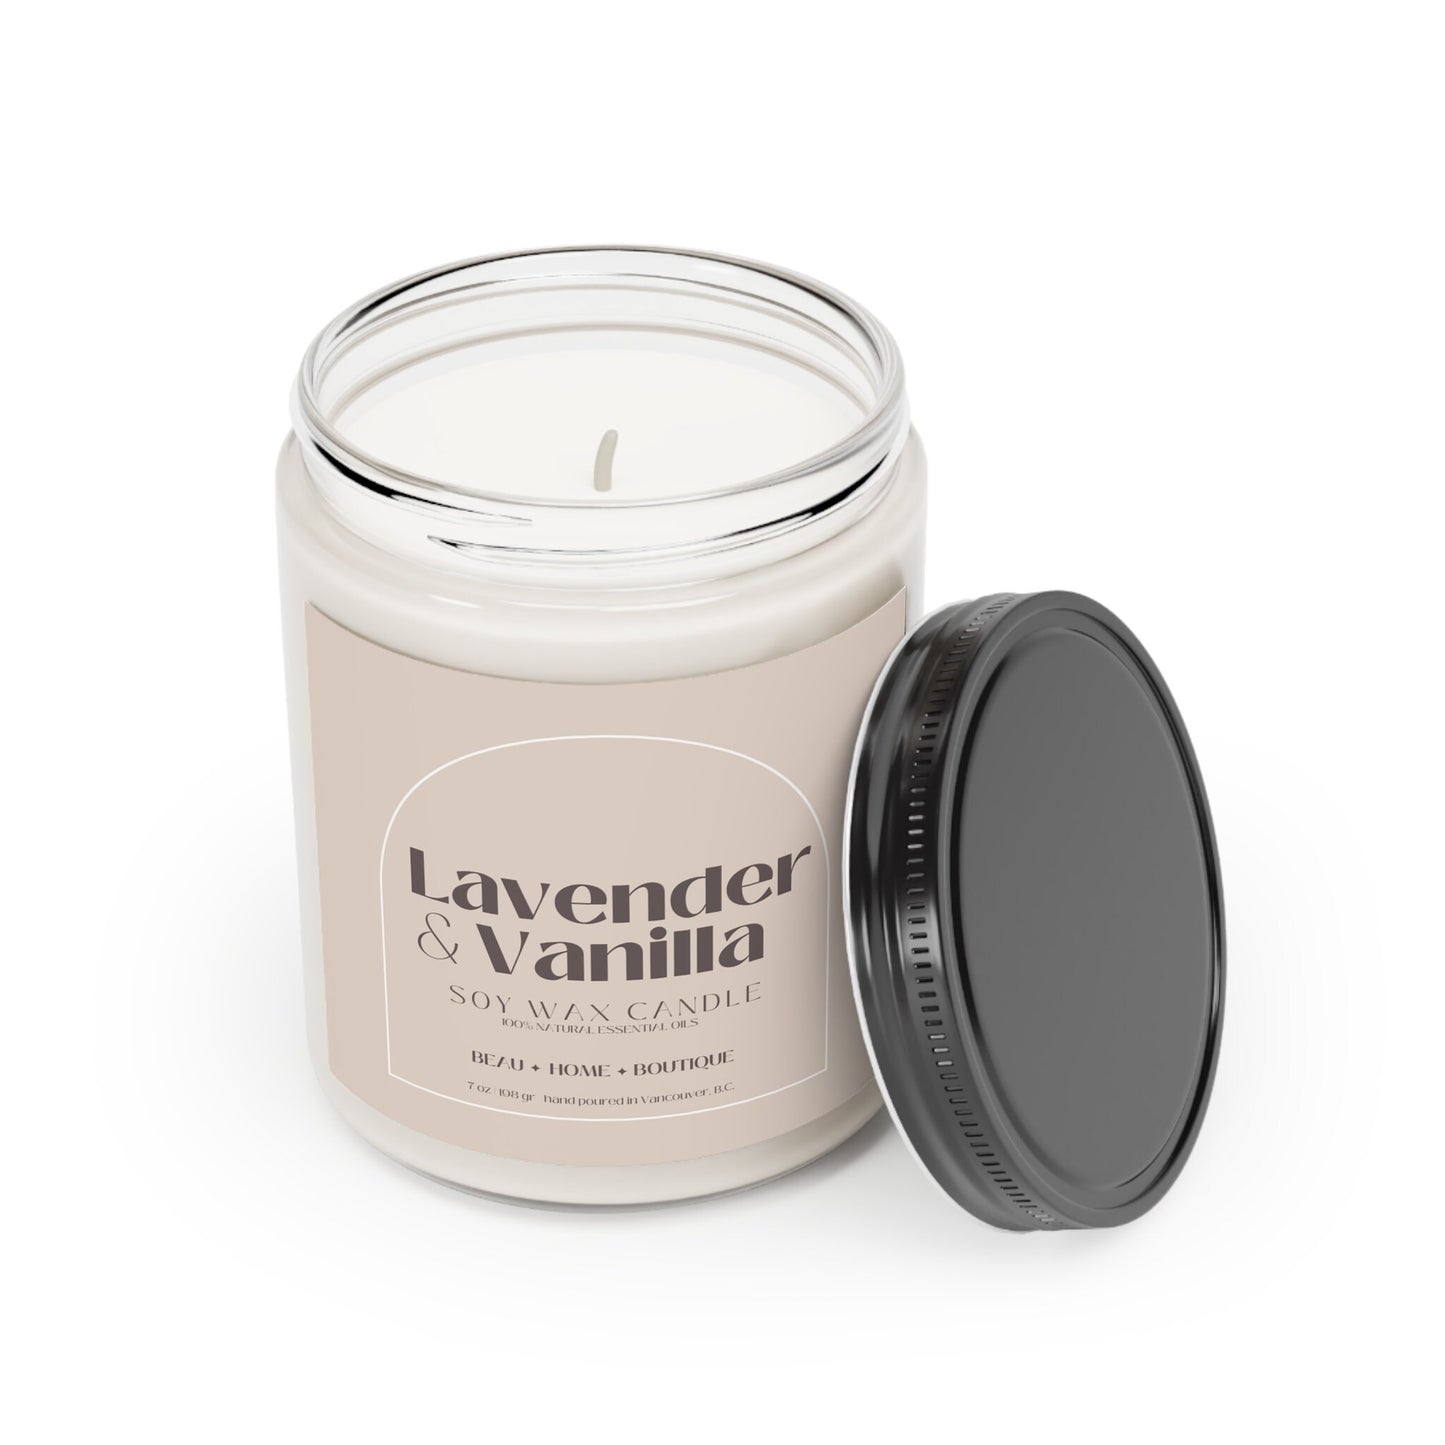 Lavender and Vanilla Soy Wax Candle | Essential Oils Relaxation Candle